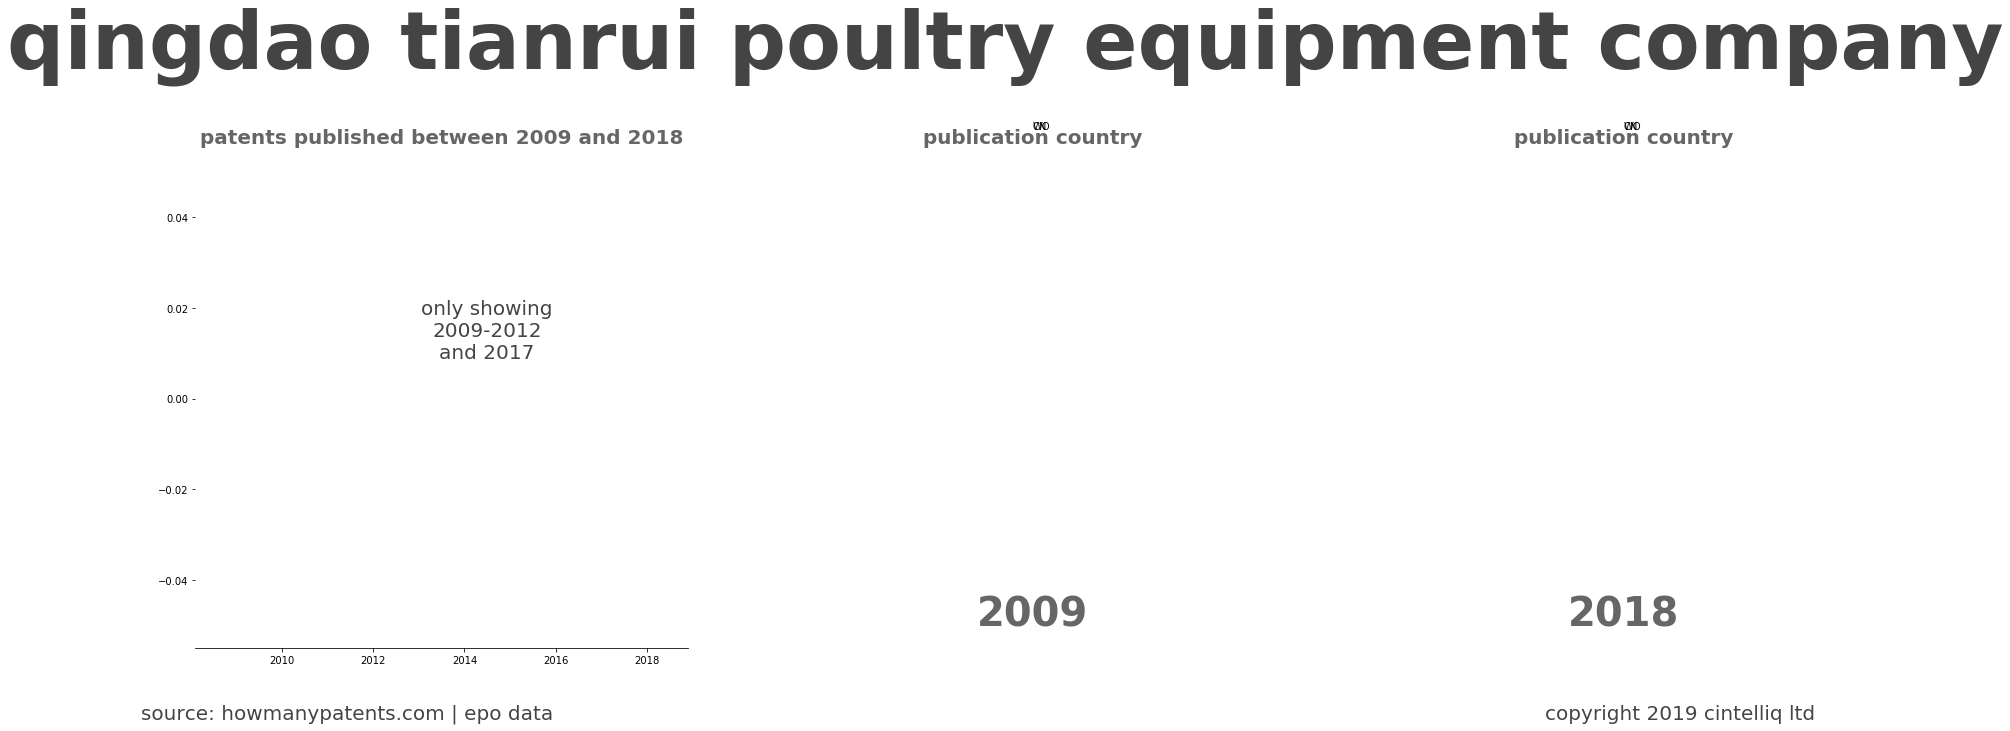 summary of patents for Qingdao Tianrui Poultry Equipment Company